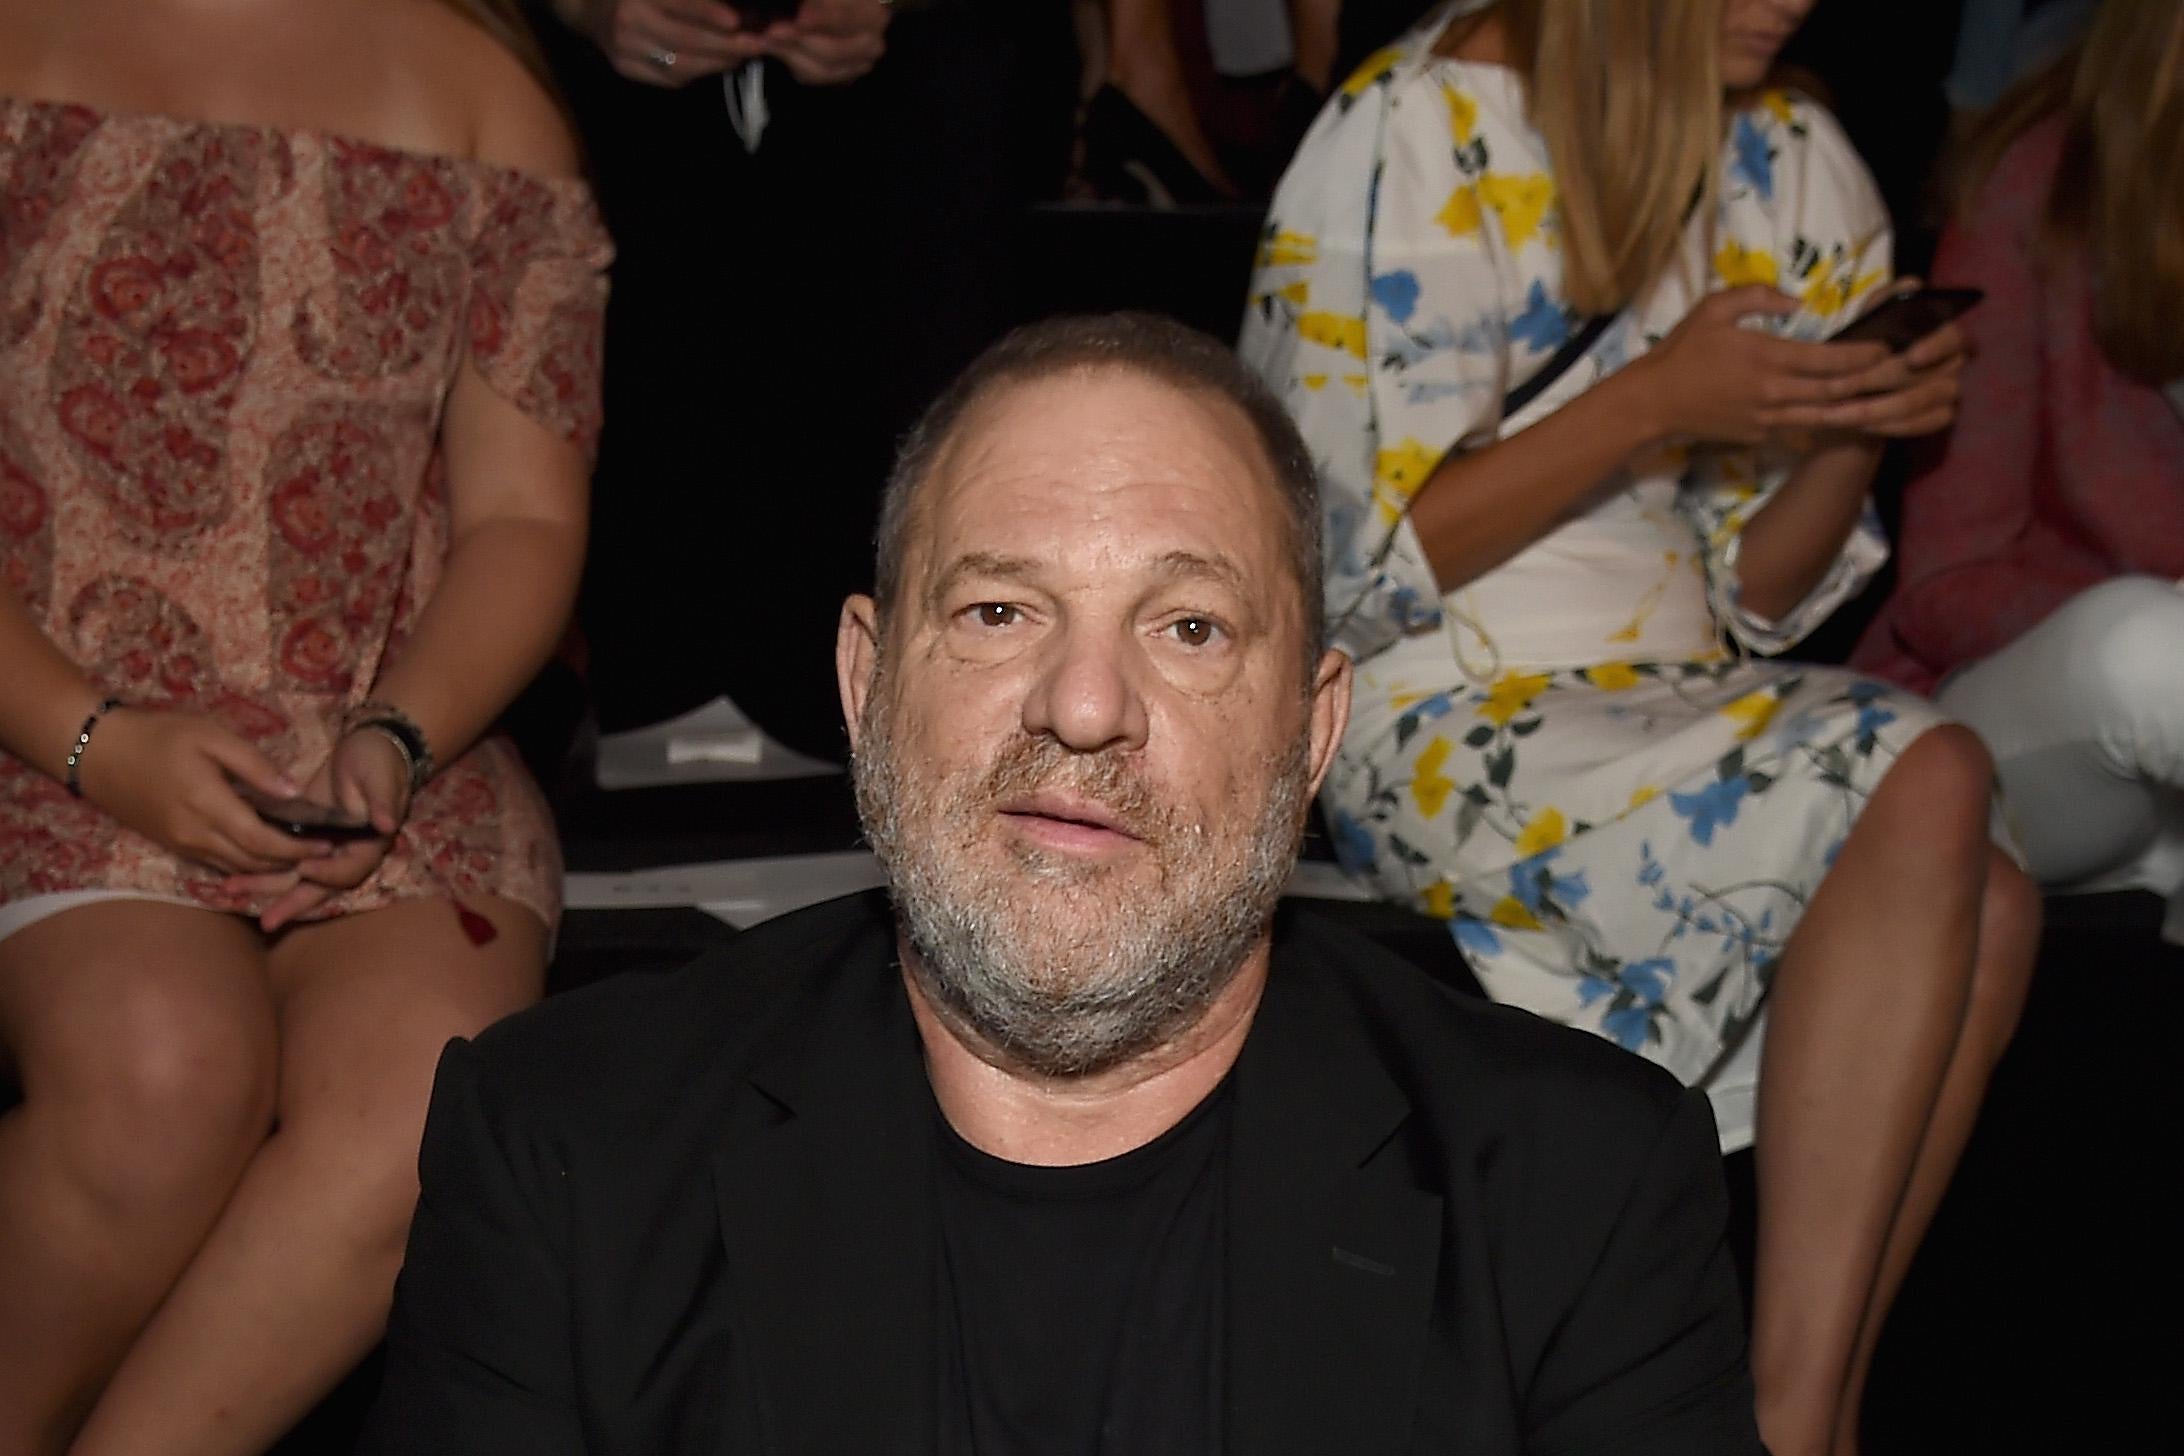 NEW YORK, NY - SEPTEMBER 13:  Producer Harvey Weinstein attends the Marchesa fashion show during New York Fashion Week: The Shows at Gallery 1, Skylight Clarkson Sq on September 13, 2017 in New York City.  (Photo by Nicholas Hunt/Getty Images For NYFW: The Shows)